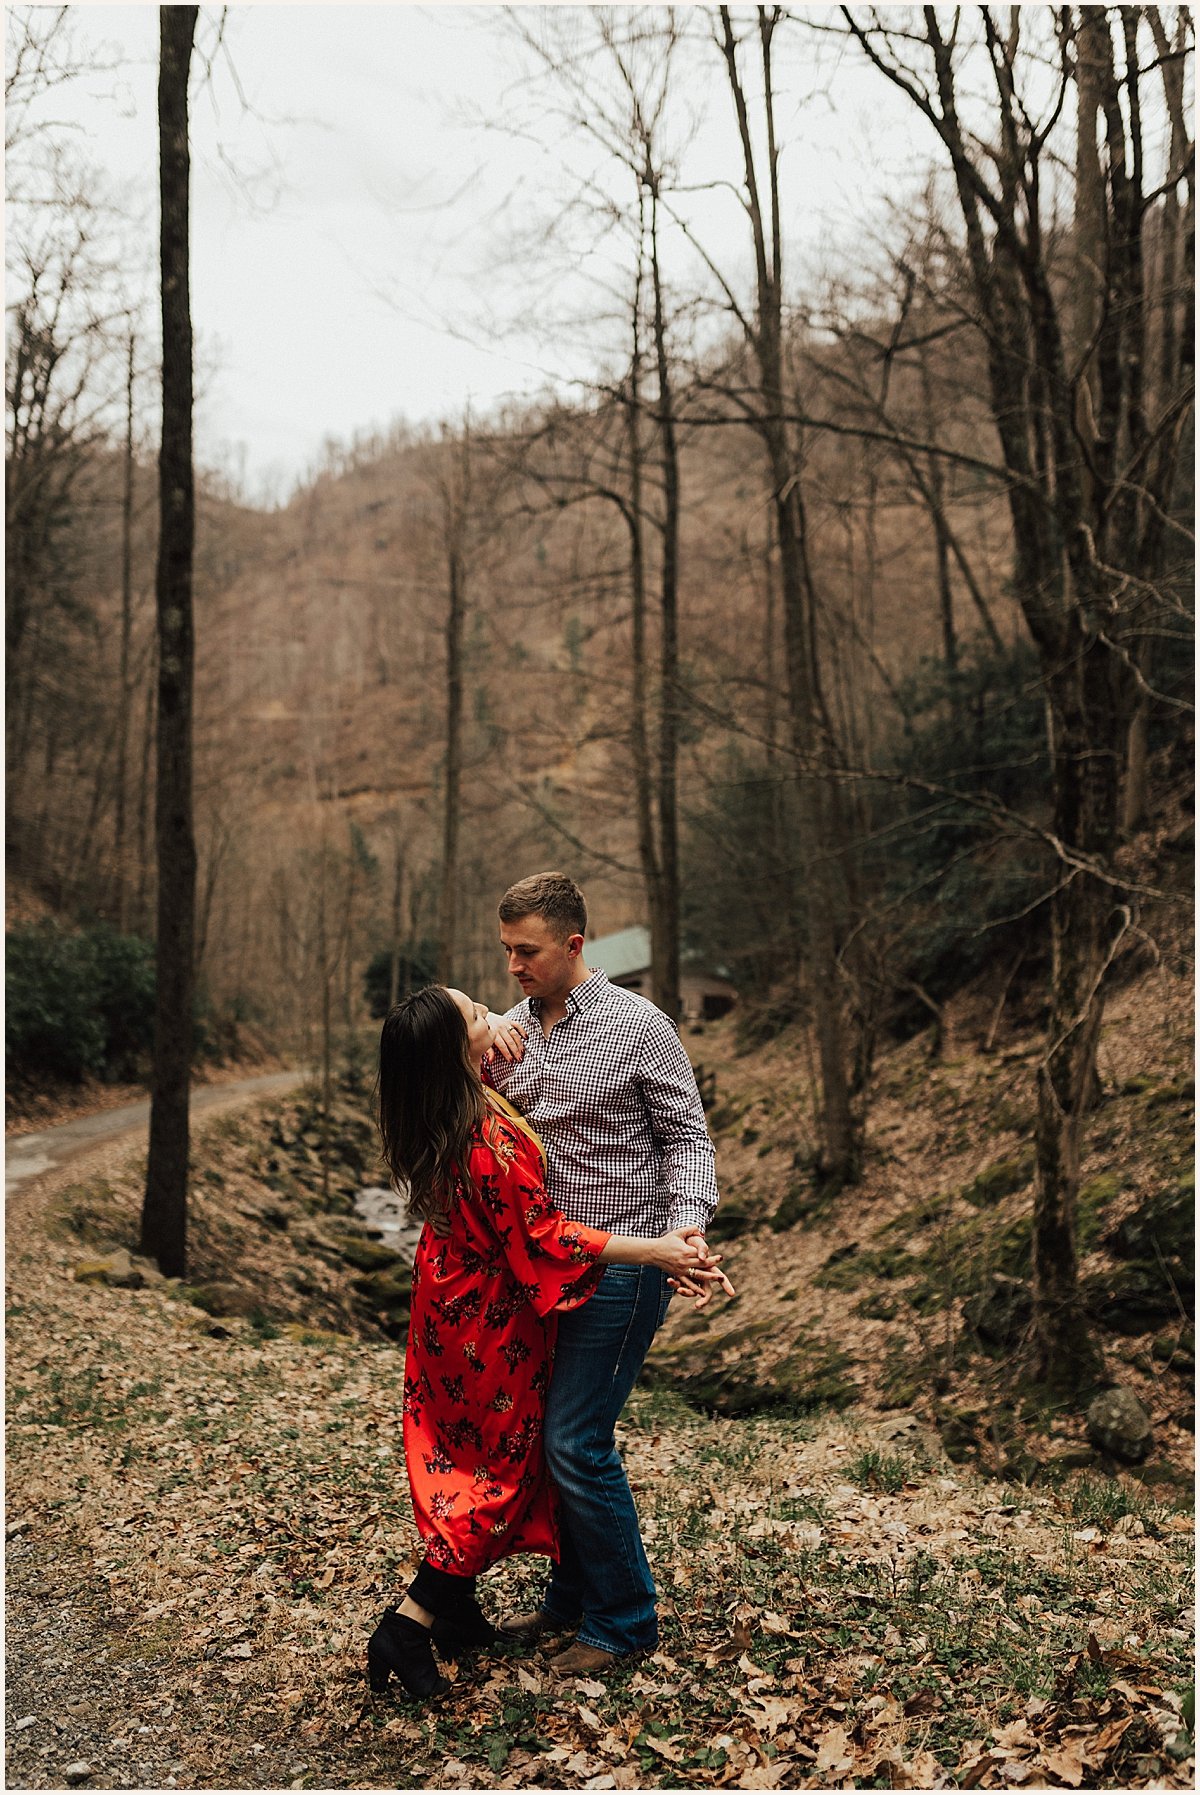 Coupe in the Smoky Mountains with Dog | Lauren Parr Photography | Traveling Wedding Photographer Capturing Intimate Moments